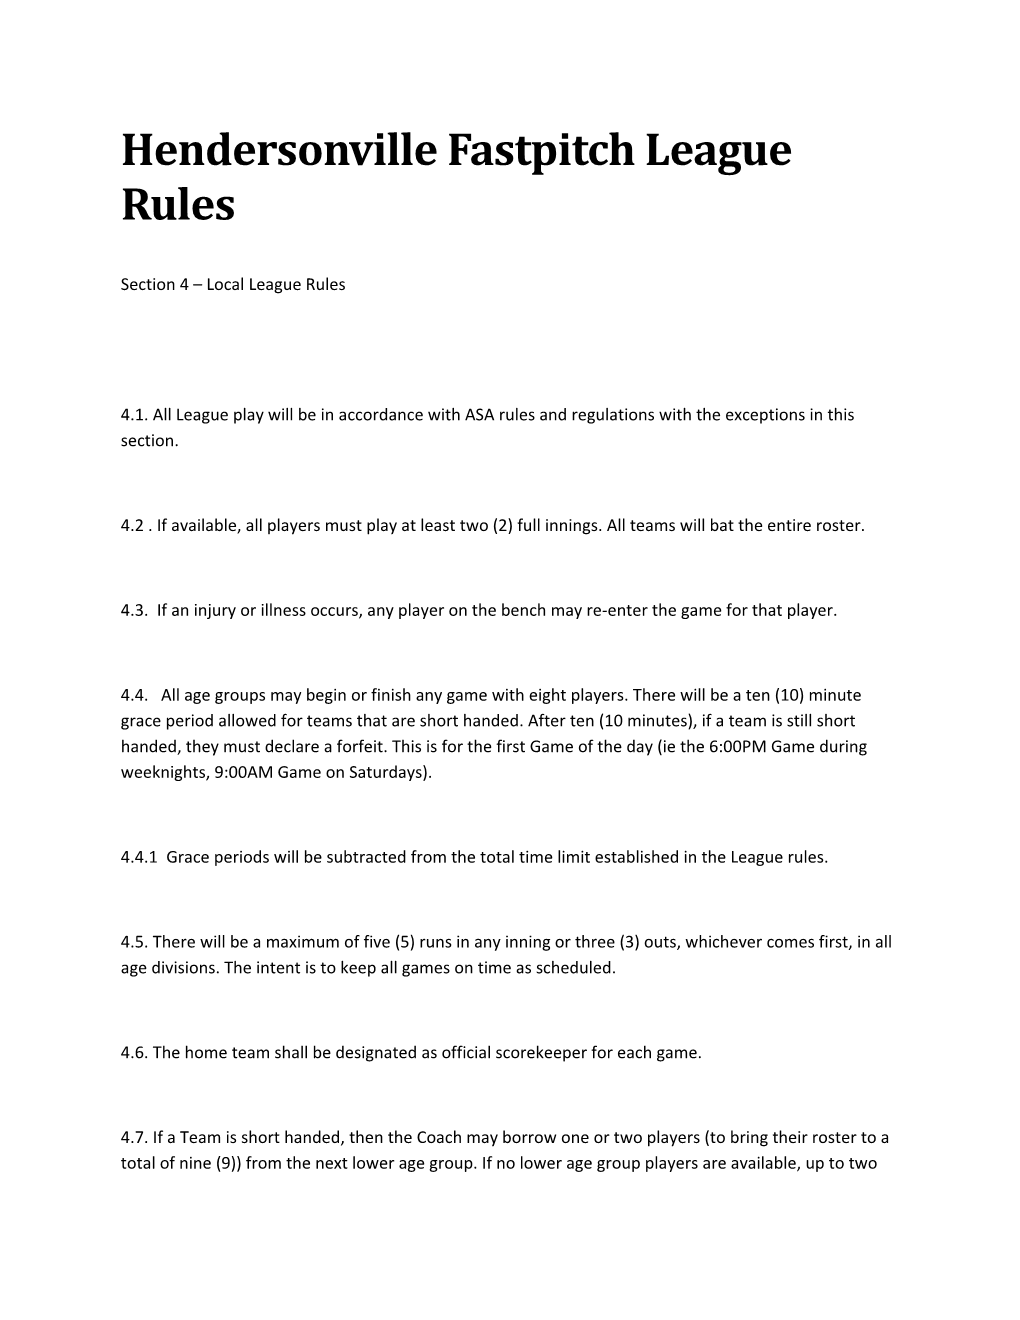 Hendersonville Fastpitch League Rules